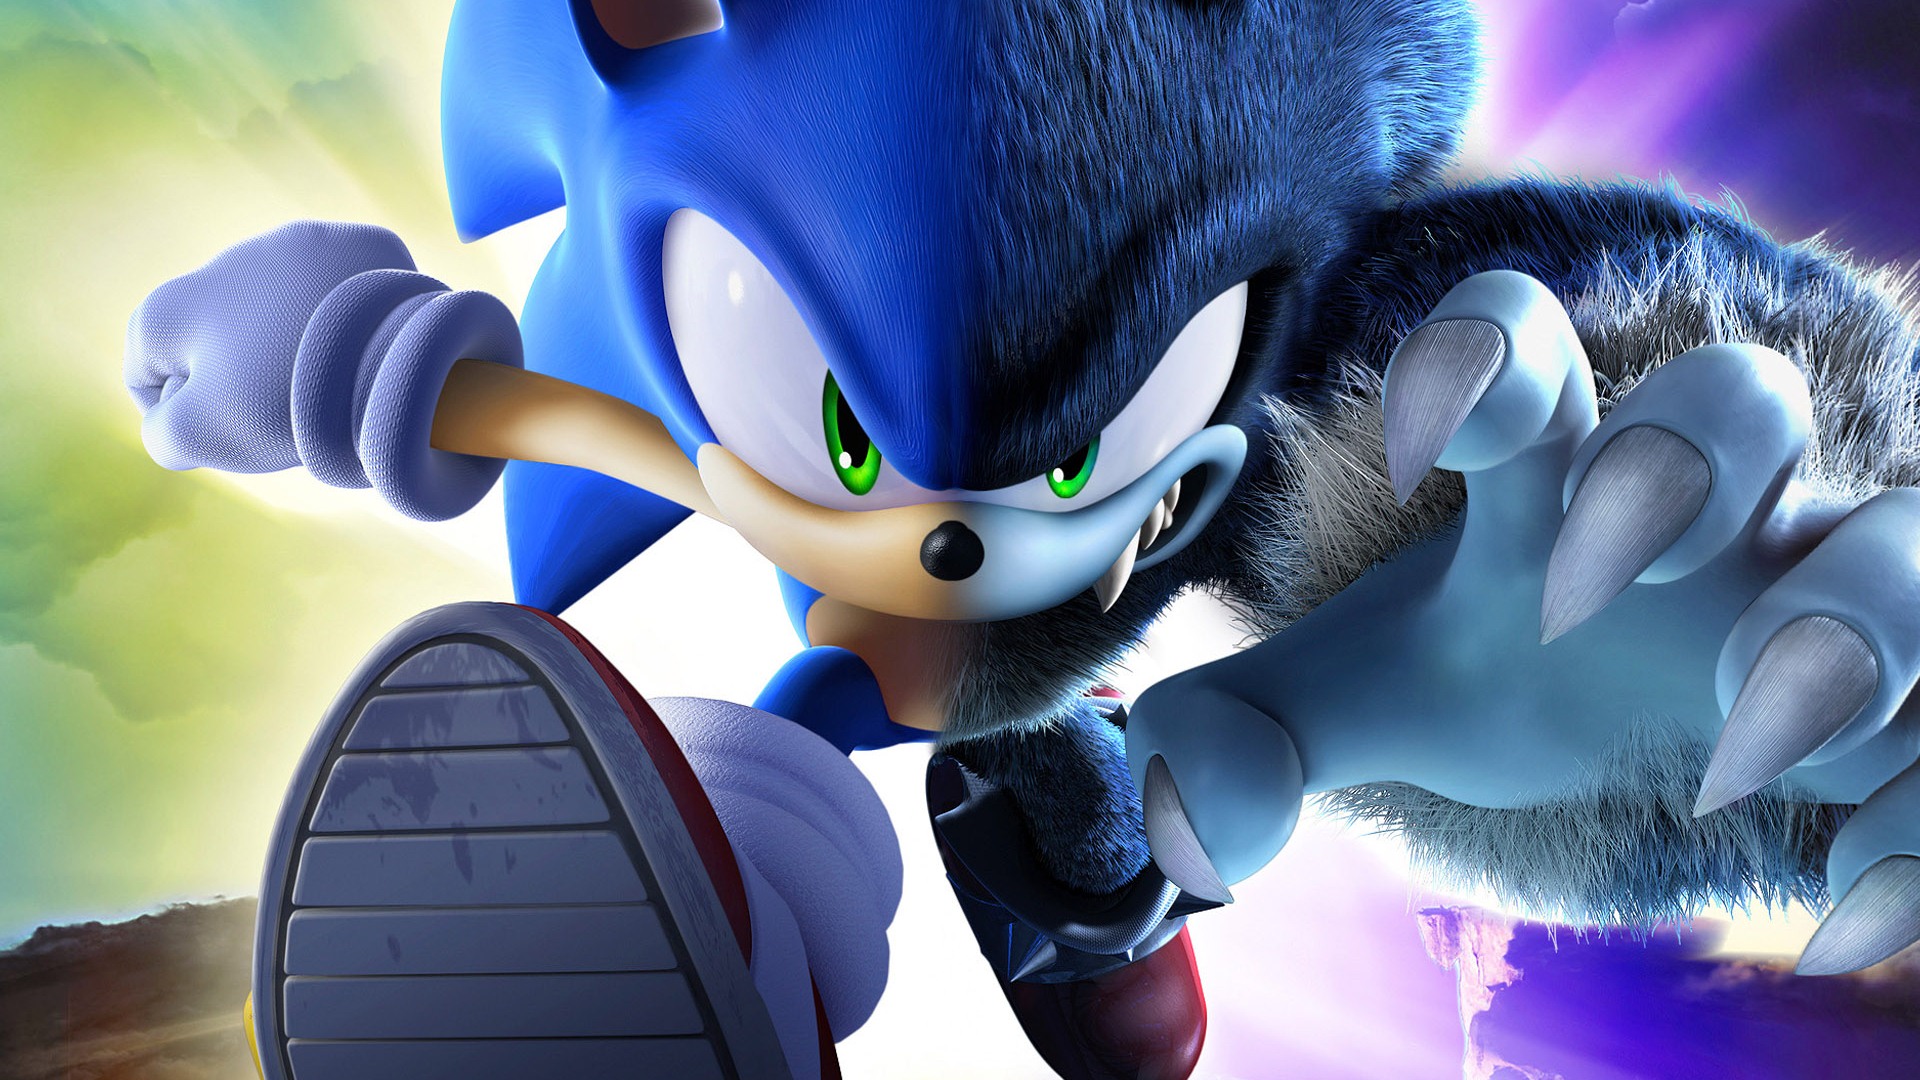 Sonic HD wallpapers #5 - 1920x1080